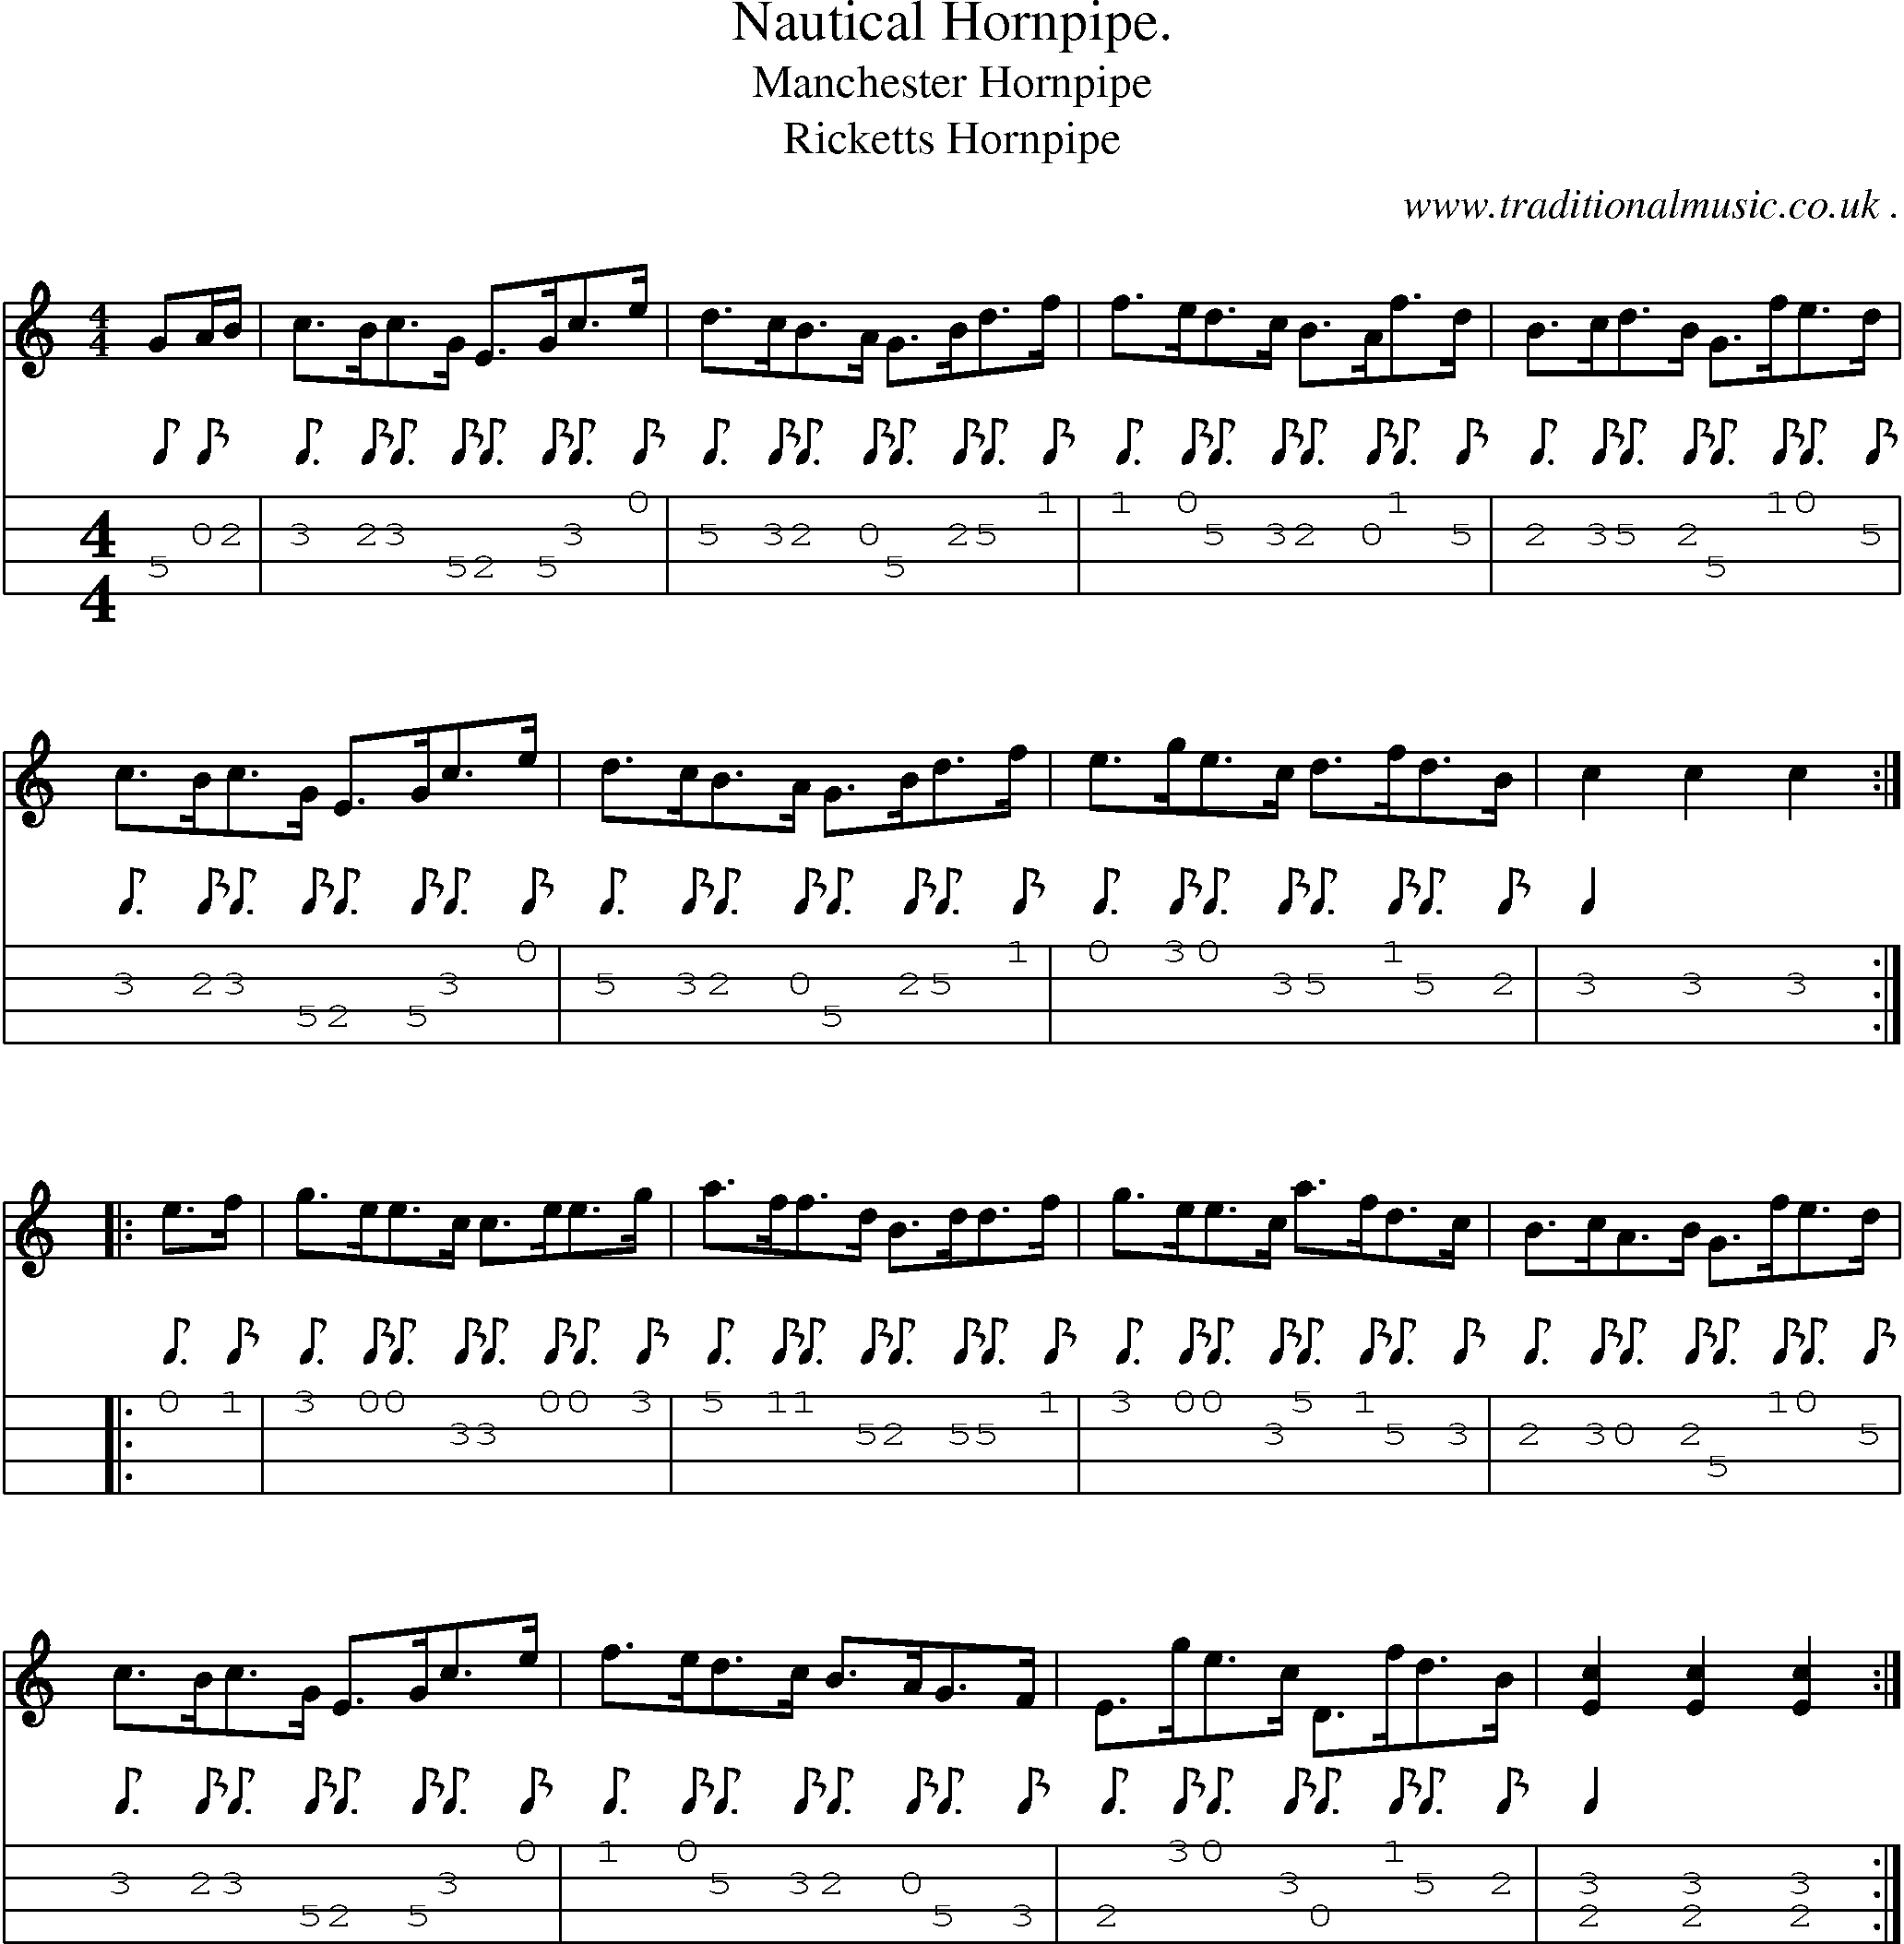 Sheet-Music and Mandolin Tabs for Nautical Hornpipe